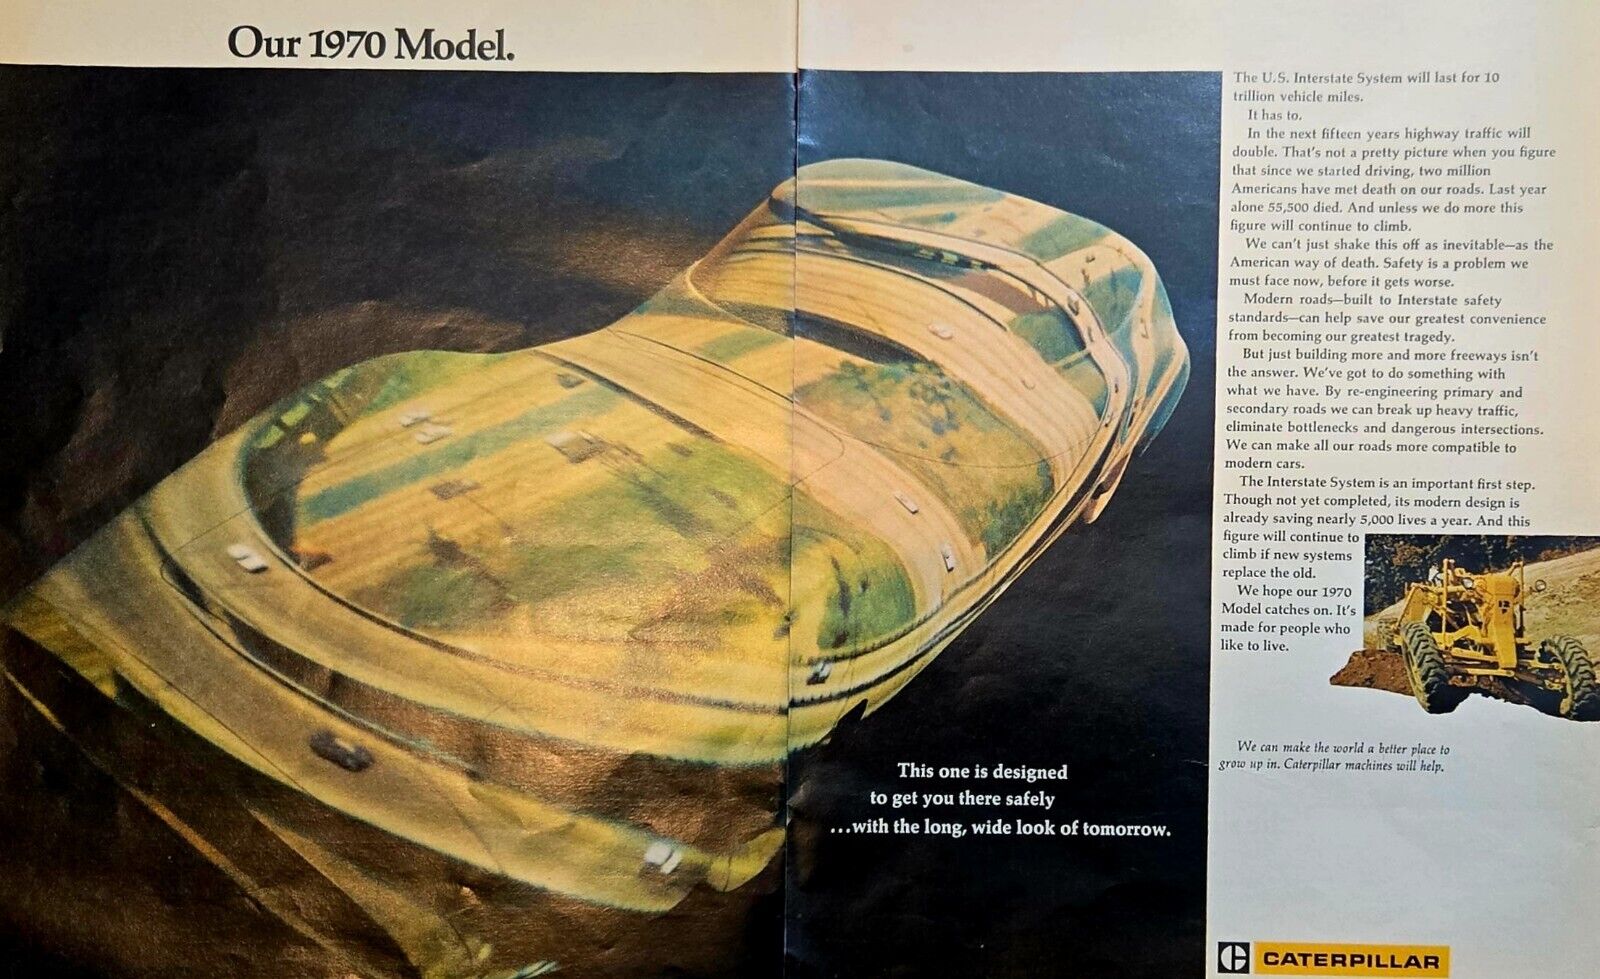 1969 Caterpillar Vintage Print Ad Instate HIGHWAY system Not Completed 1970model